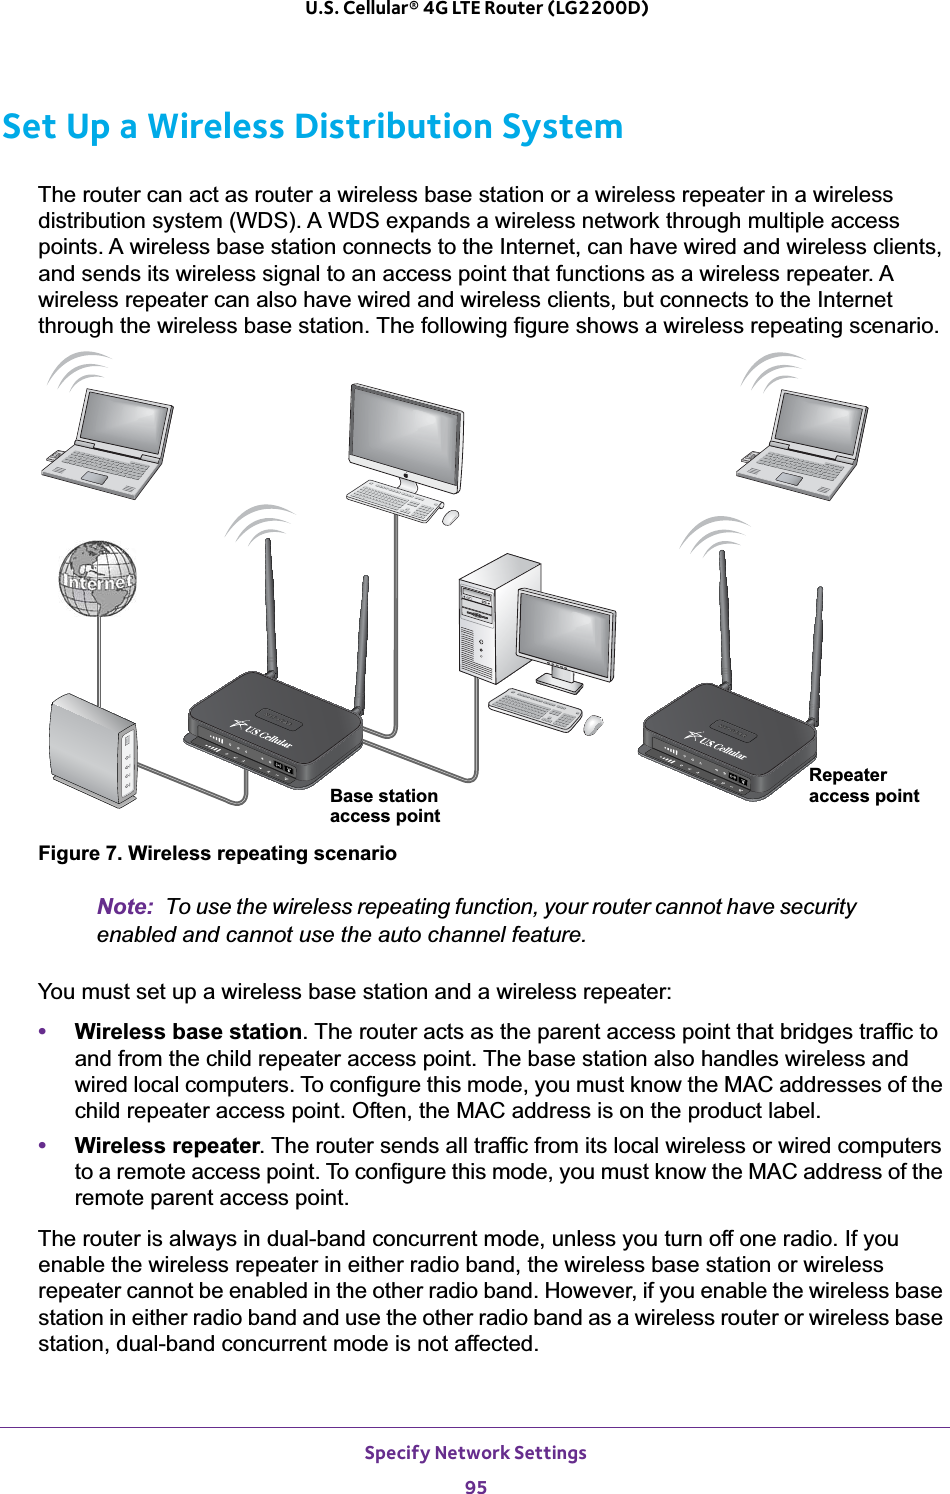 Specify Network Settings95 U.S. Cellular® 4G LTE Router (LG2200D)Set Up a Wireless Distribution SystemThe router can act as router a wireless base station or a wireless repeater in a wireless distribution system (WDS). A WDS expands a wireless network through multiple access points. A wireless base station connects to the Internet, can have wired and wireless clients, and sends its wireless signal to an access point that functions as a wireless repeater. A wireless repeater can also have wired and wireless clients, but connects to the Internet through the wireless base station. The following figure shows a wireless repeating scenario.RepeaterBase station access pointaccess pointFigure 7. Wireless repeating scenarioNote: To use the wireless repeating function, your router cannot have security enabled and cannot use the auto channel feature.You must set up a wireless base station and a wireless repeater:•Wireless base station. The router acts as the parent access point that bridges traffic to and from the child repeater access point. The base station also handles wireless and wired local computers. To configure this mode, you must know the MAC addresses of the child repeater access point. Often, the MAC address is on the product label.•Wireless repeater. The router sends all traffic from its local wireless or wired computers to a remote access point. To configure this mode, you must know the MAC address of the remote parent access point. The router is always in dual-band concurrent mode, unless you turn off one radio. If you enable the wireless repeater in either radio band, the wireless base station or wireless repeater cannot be enabled in the other radio band. However, if you enable the wireless base station in either radio band and use the other radio band as a wireless router or wireless base station, dual-band concurrent mode is not affected.